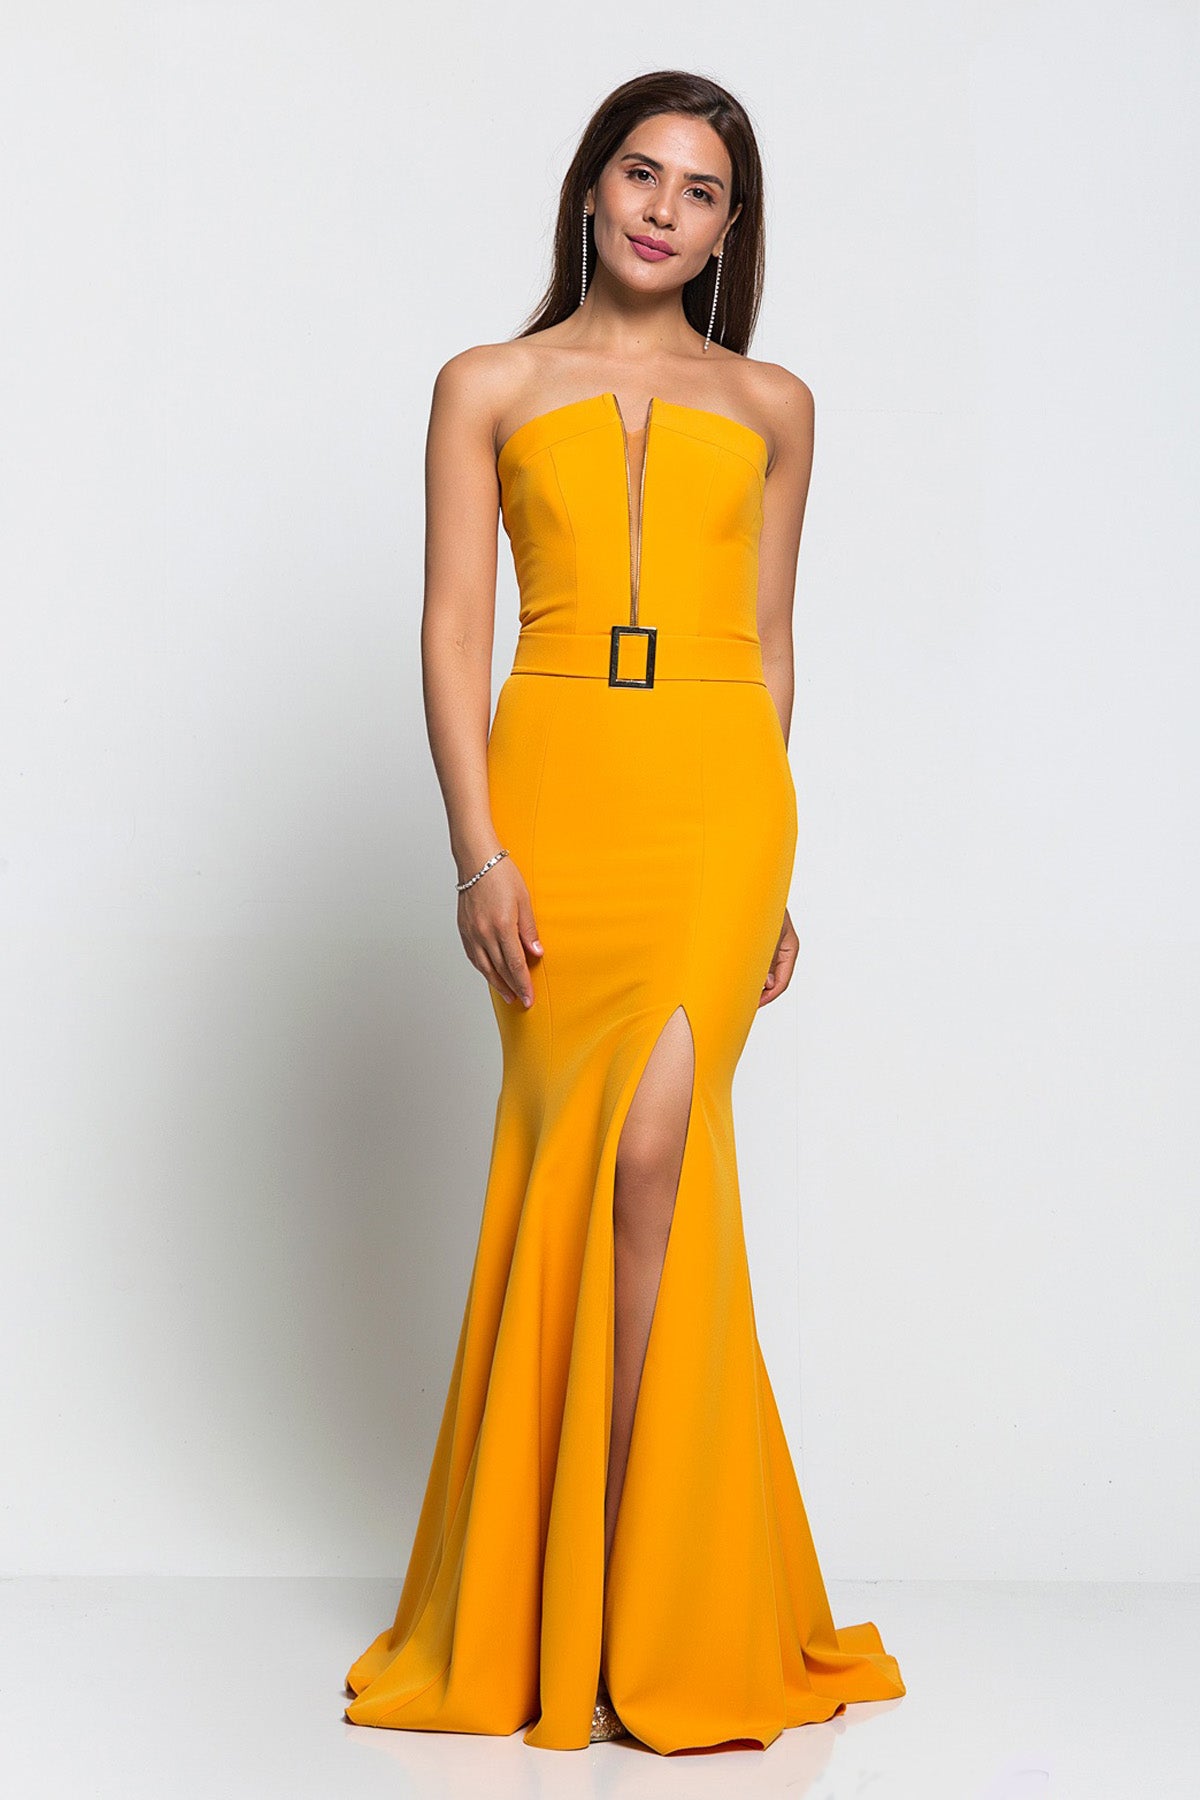 Strapless Mermaid Crepe Maxi Dress - Mystic Evenings | Evening and Prom Dresses